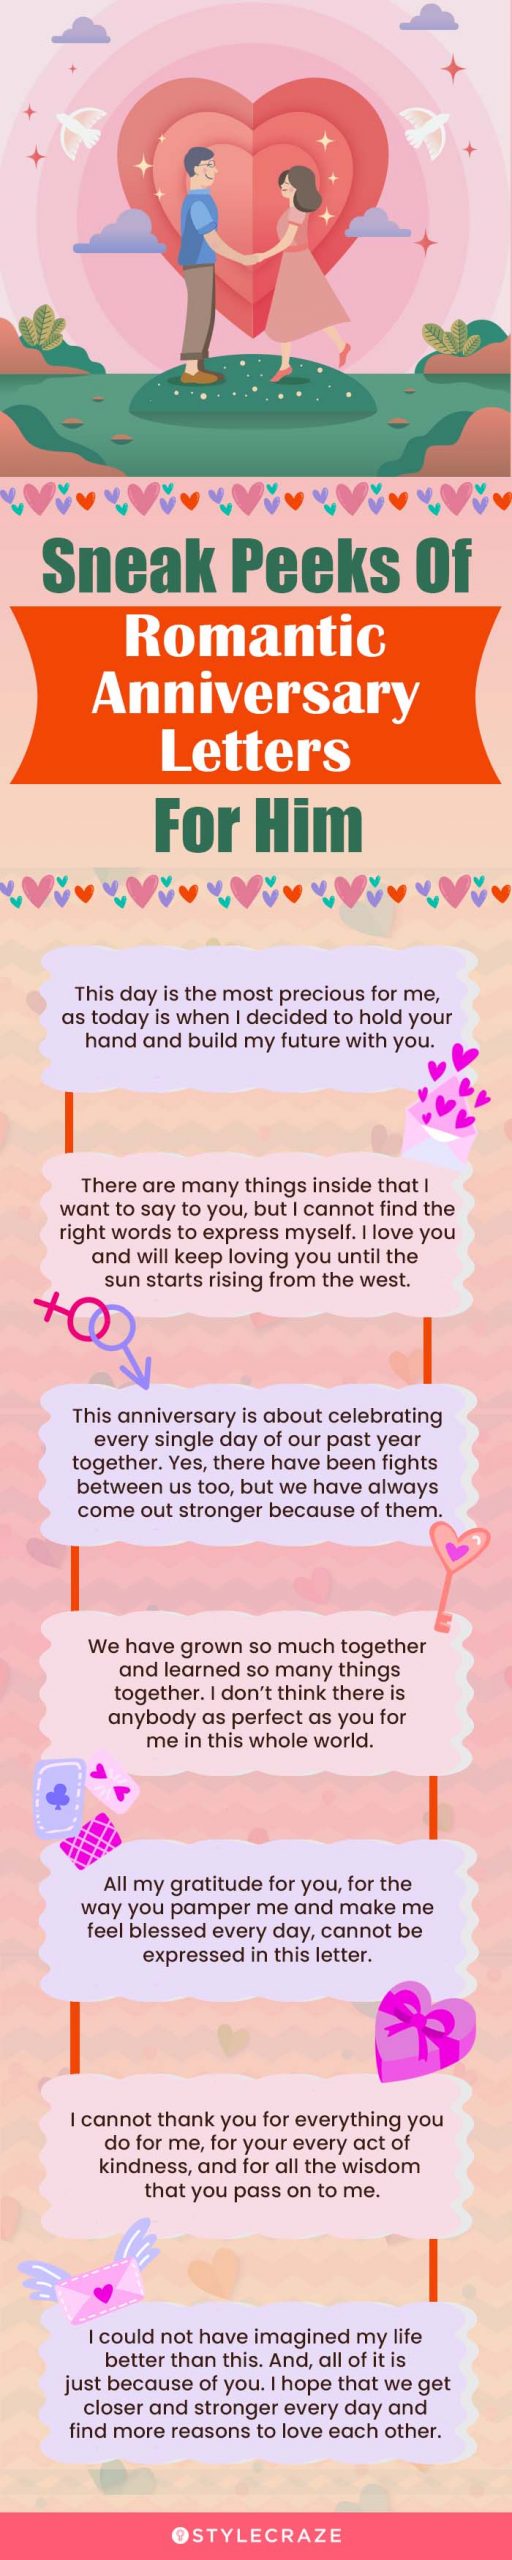 sneak peeks of romantic anniversary letters for him (infographic)